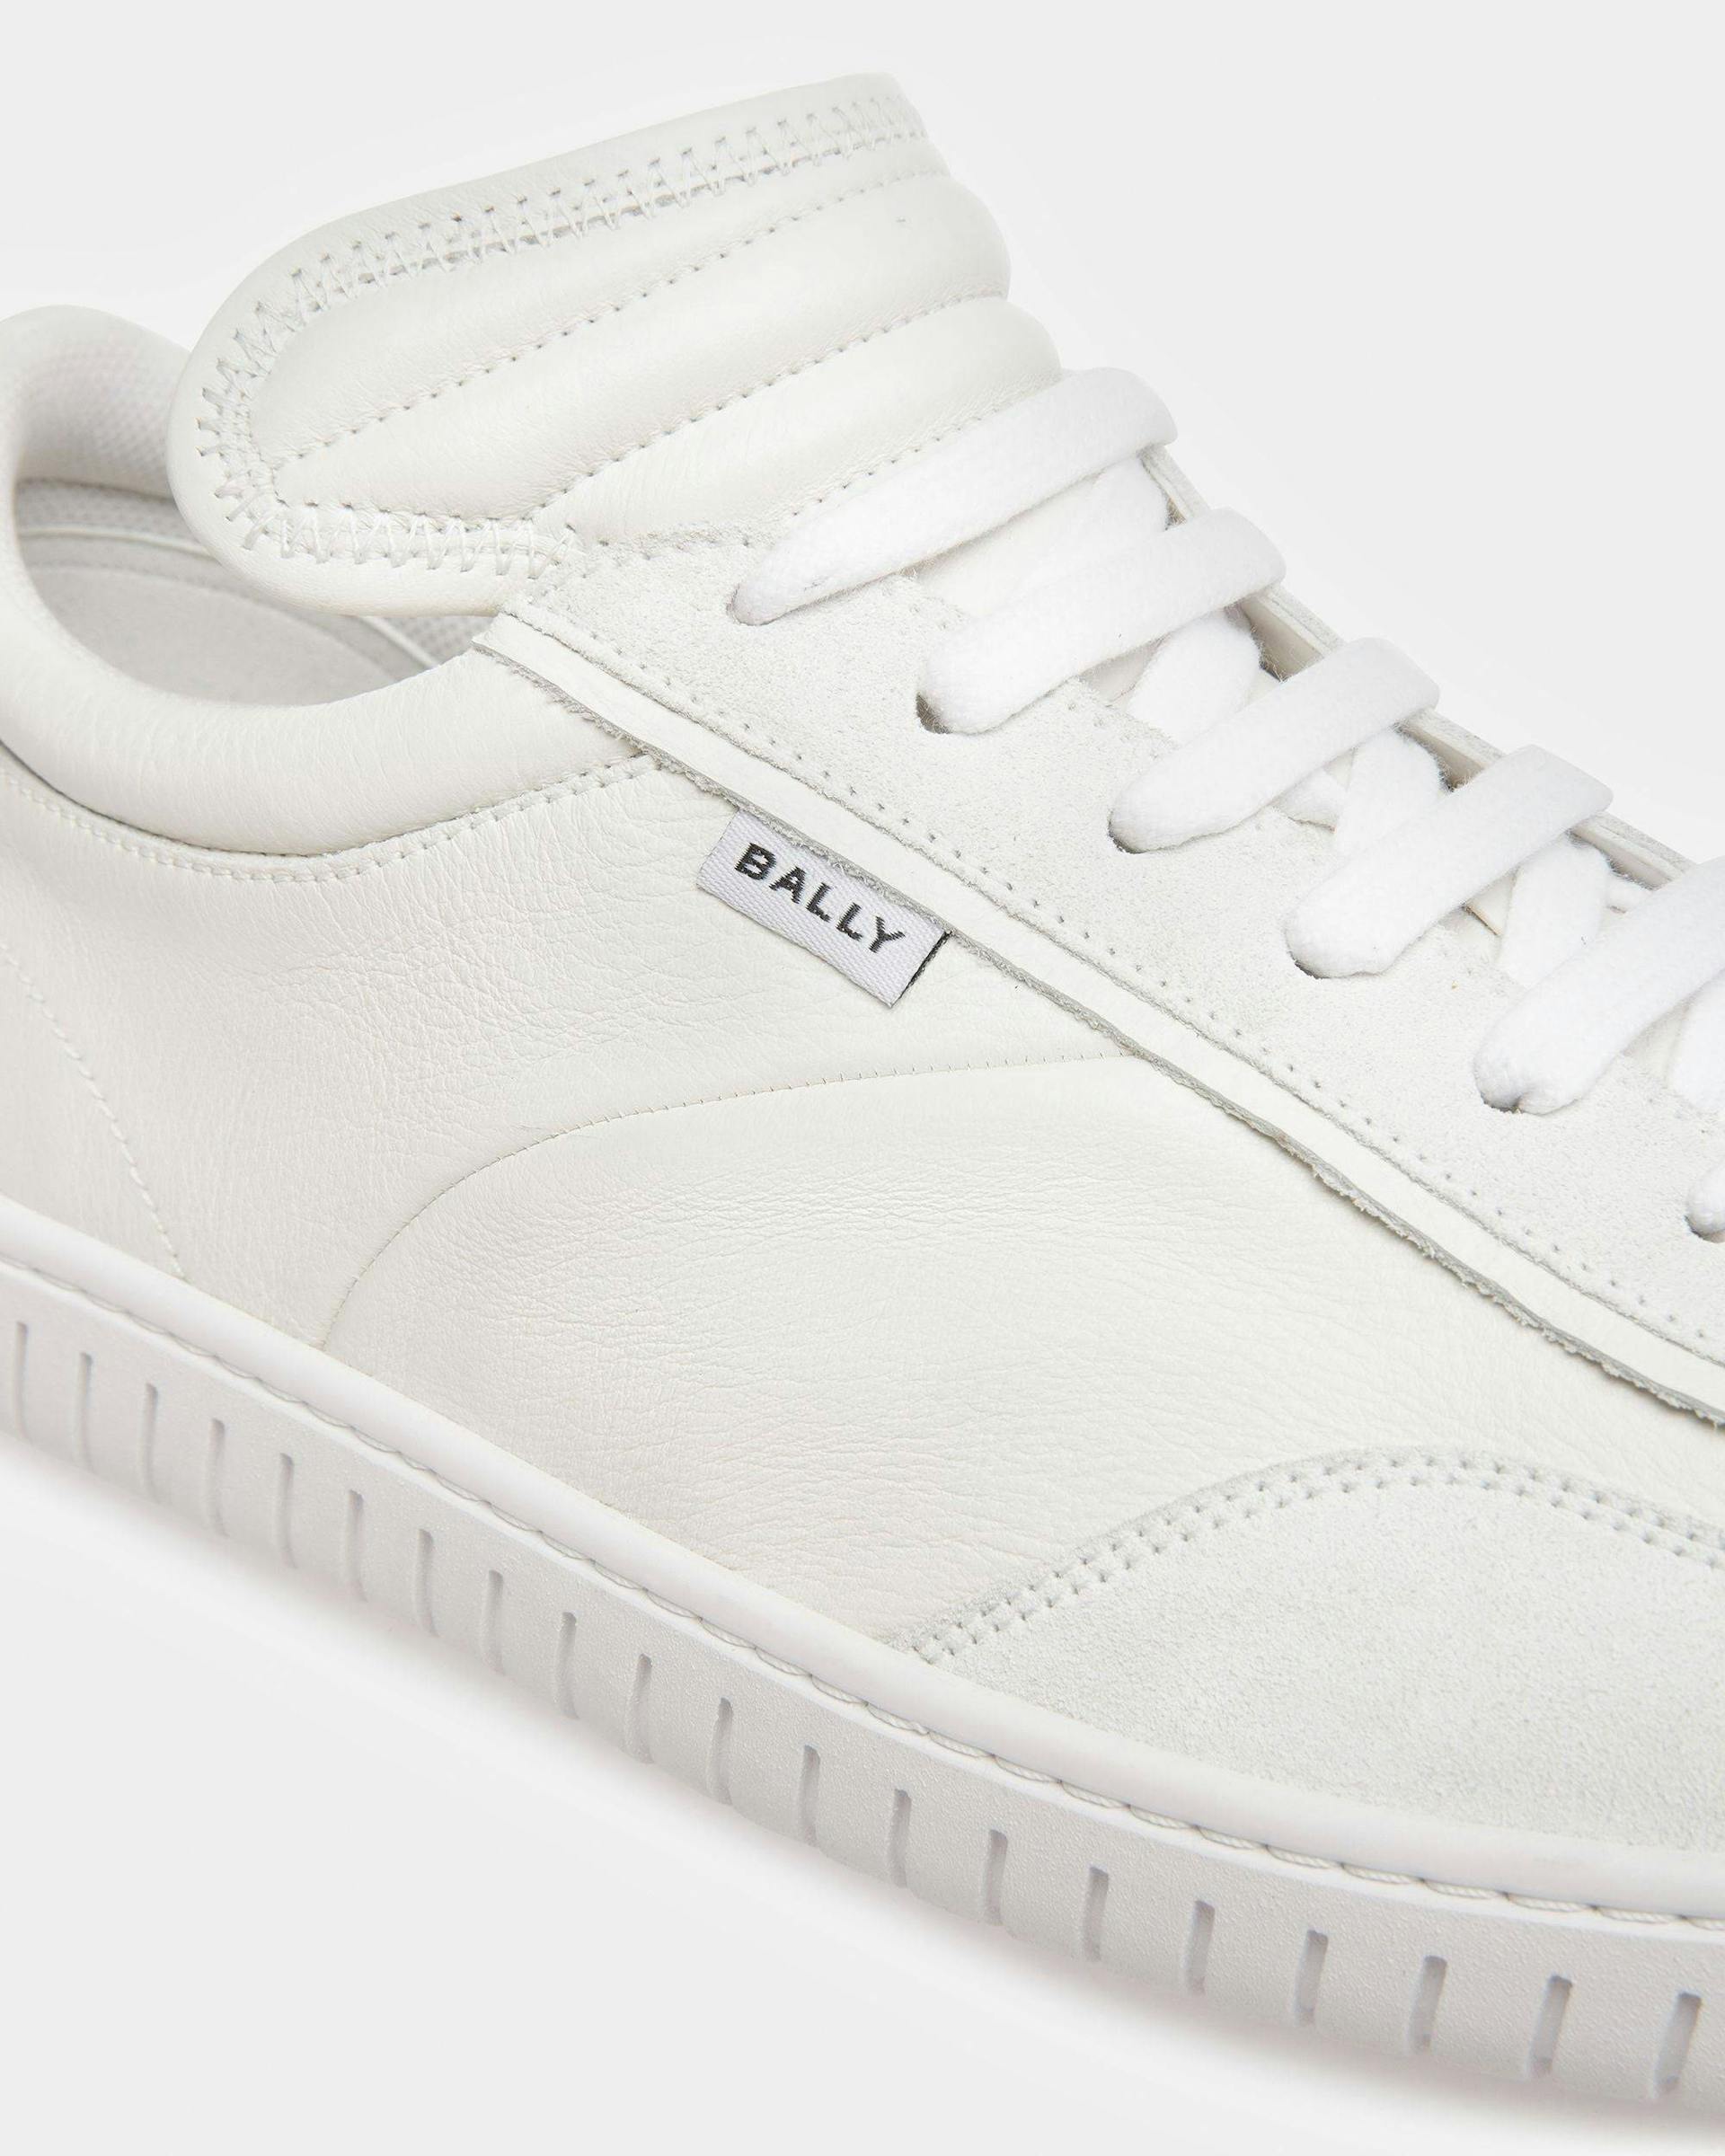 Player Sneakers In White Leather - Men's - Bally - 06